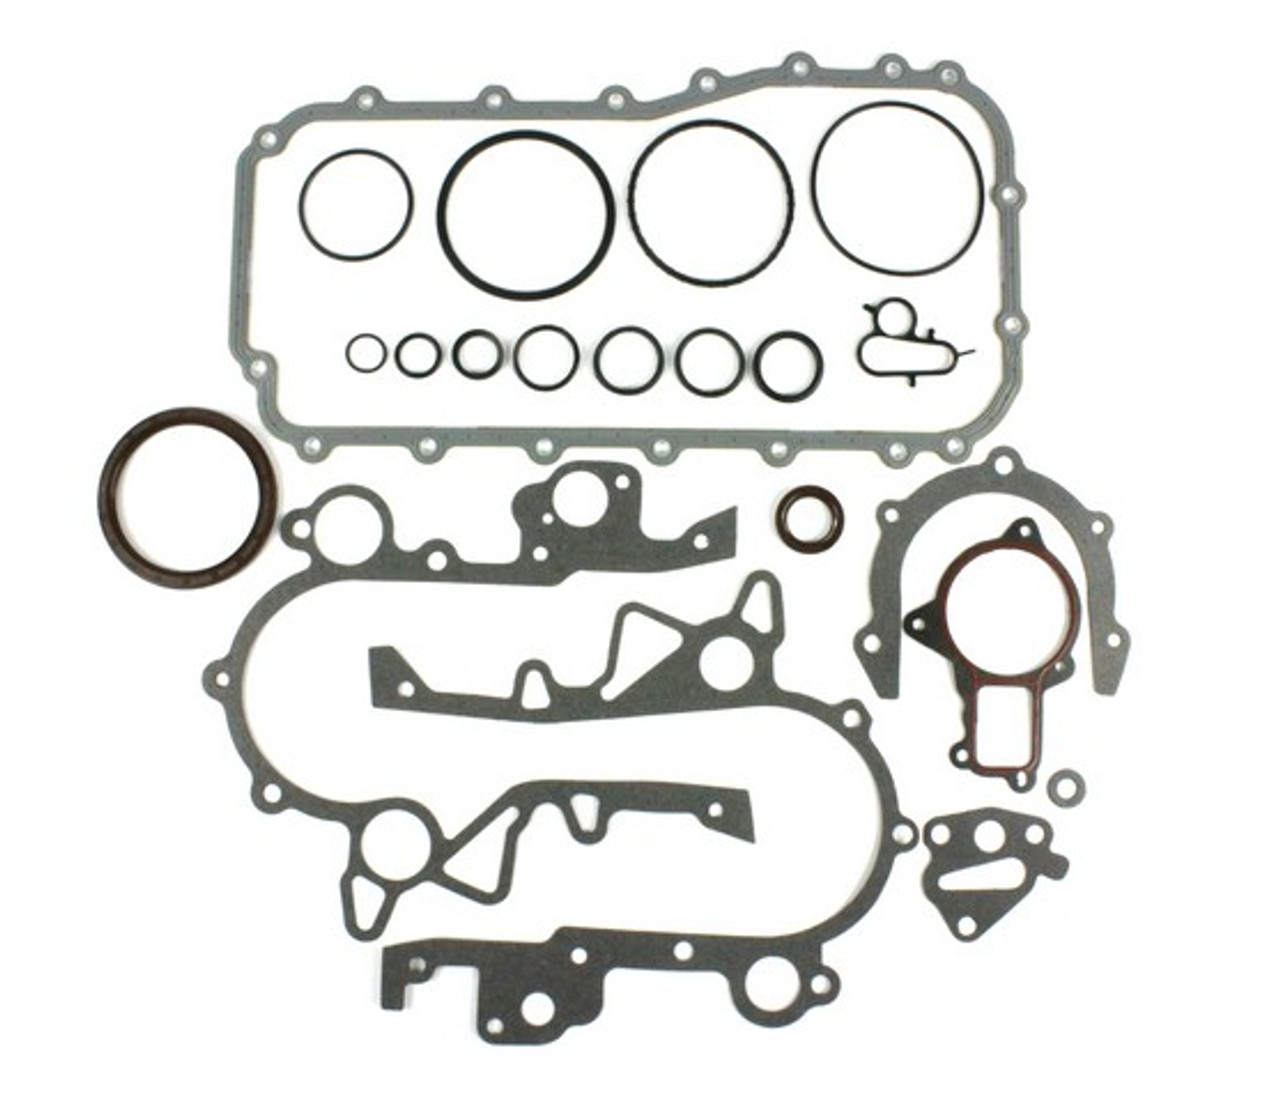 Lower Gasket Set 3.3L 2007 Chrysler Town & Country - LGS1135.61